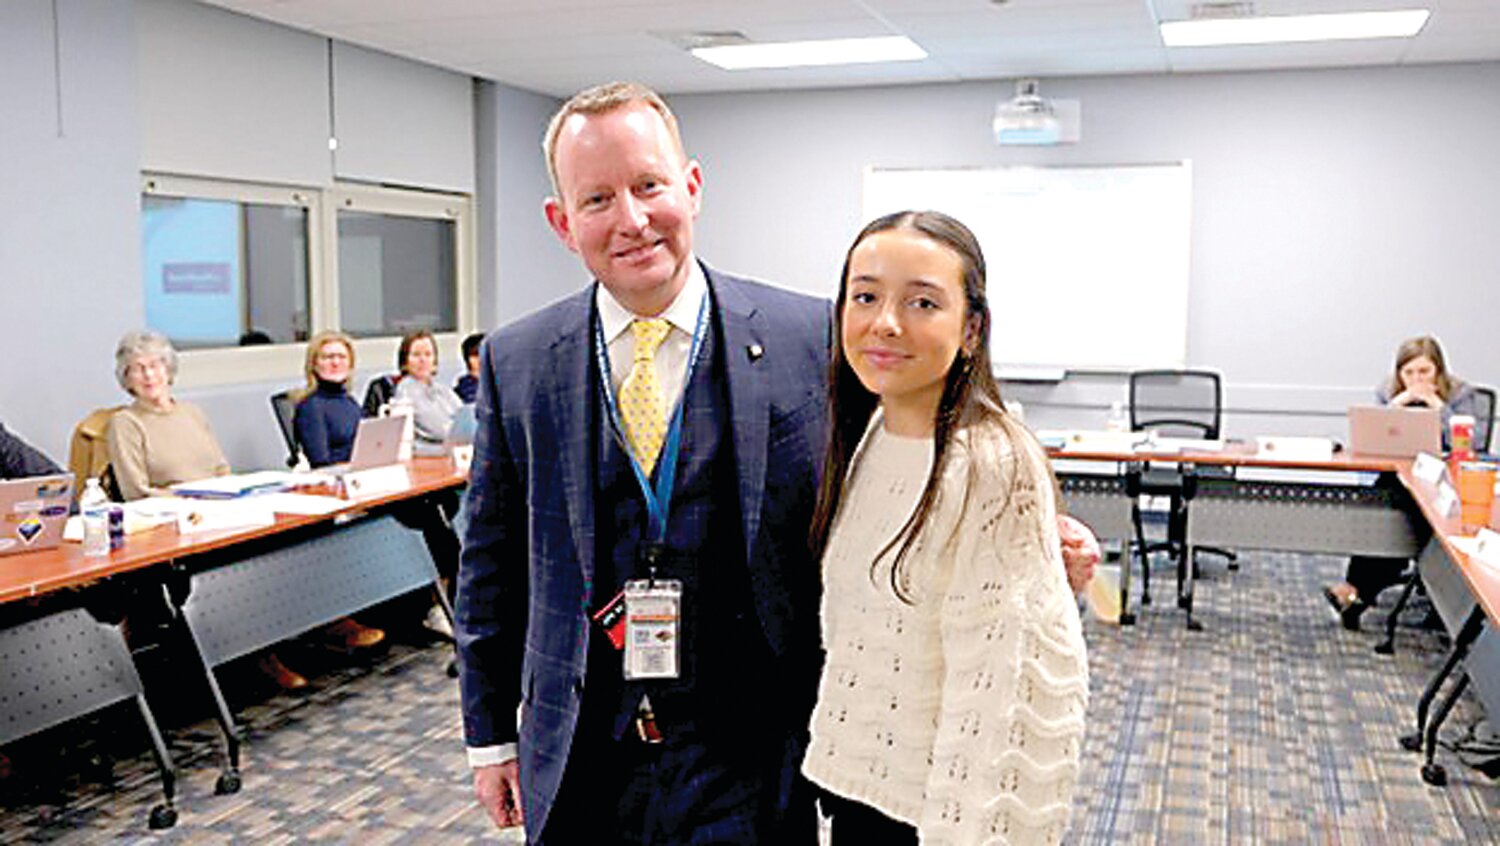 New Hope-Solebury Superintendent Dr. Charles Lentz congratulates student Jill Leyman for earning a $2,000 scholarship from the MassMutual Foundation.